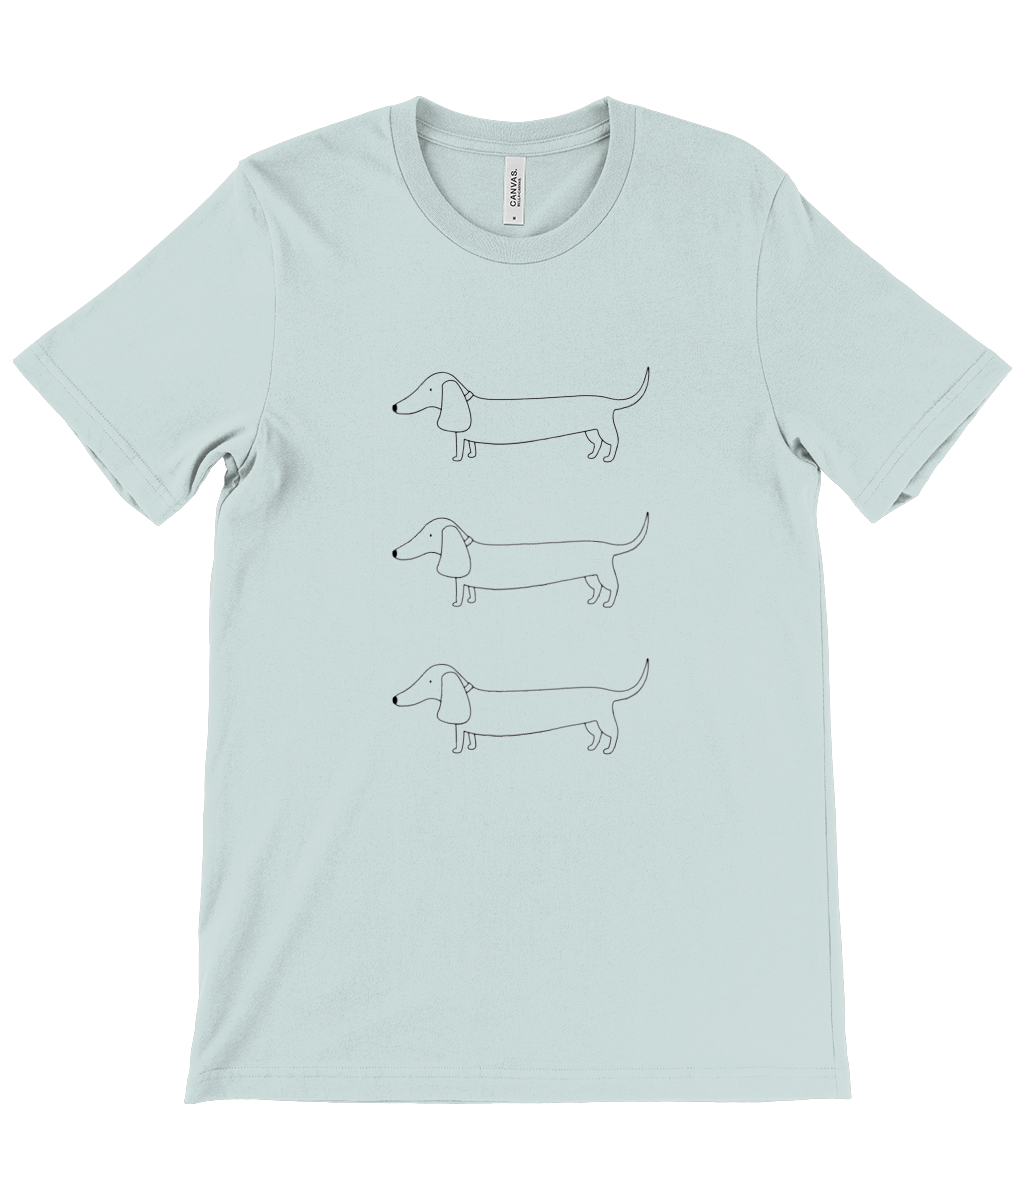 Dusty Blue unisex t-shirt. Design on front shows 3 outline drawings of sausage dogs, in a column one above the other.